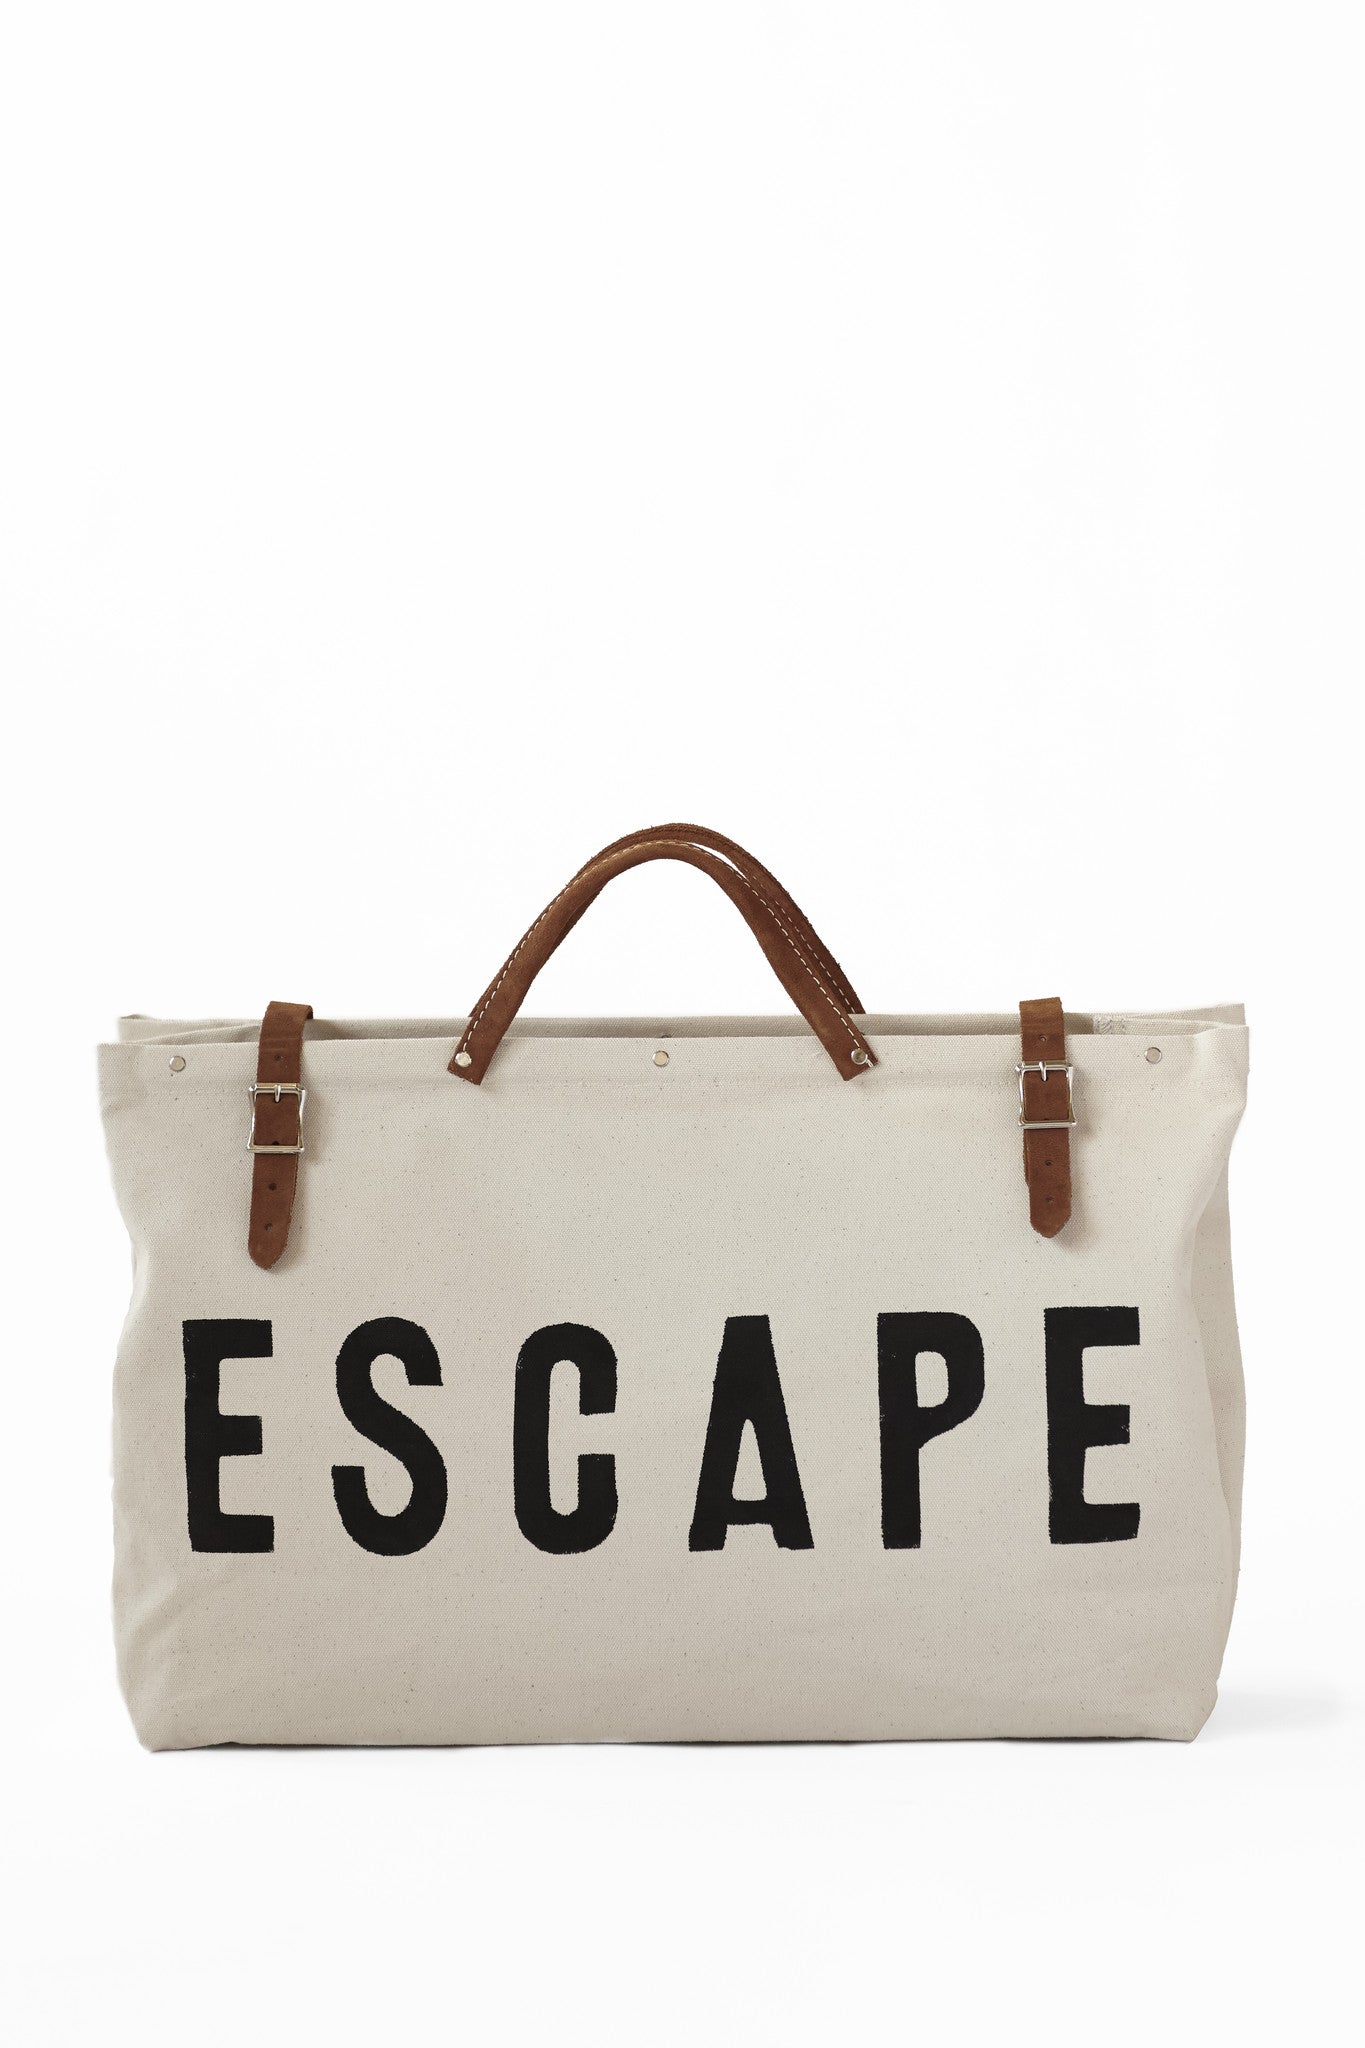 ESCAPE Canvas Utility Bag by Forestbound